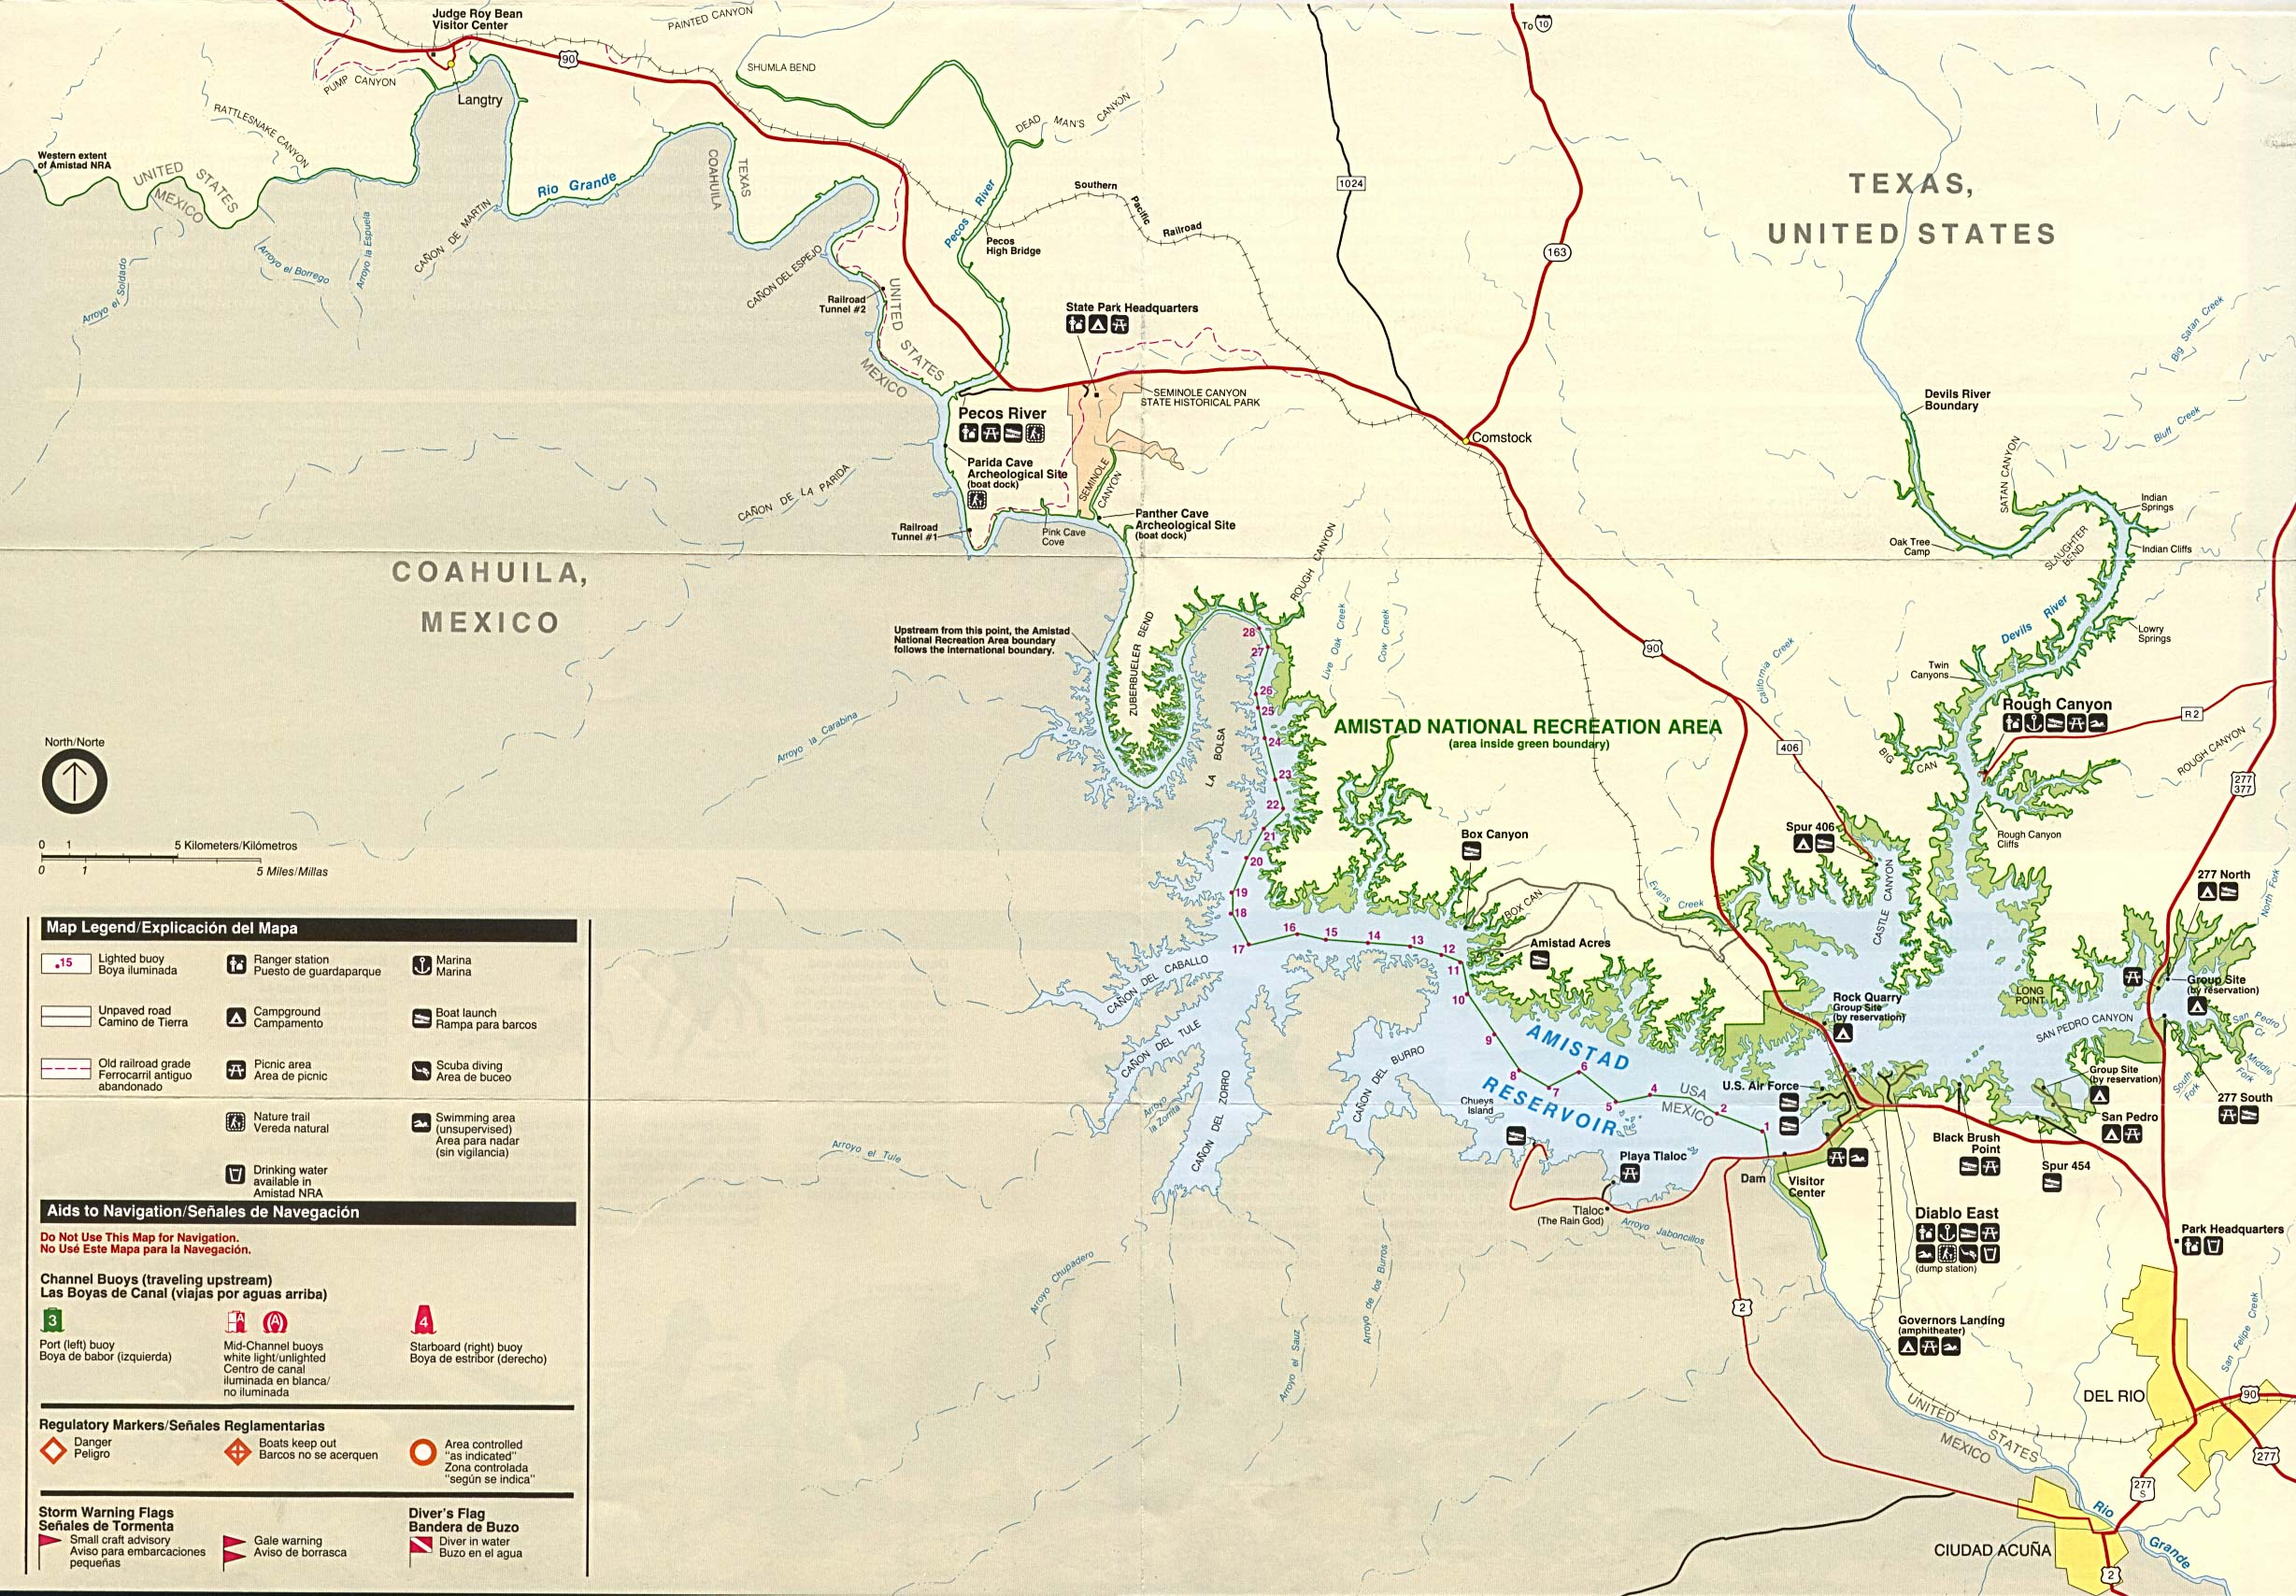 Texas State And National Park Maps - Perry-Castañeda Map Collection - Texas Parks And Wildlife Map